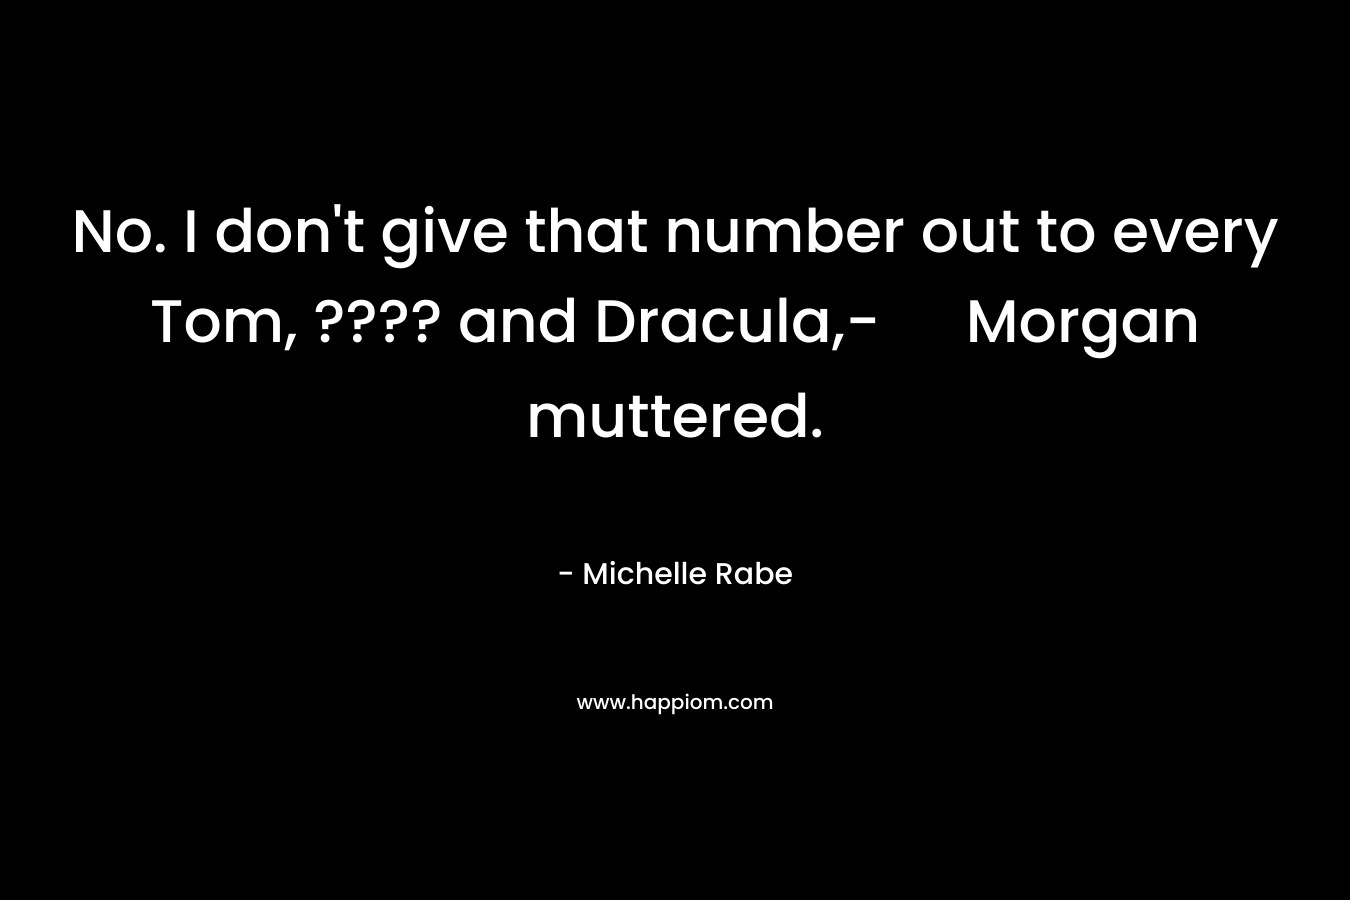 No. I don't give that number out to every Tom, ???? and Dracula,- Morgan muttered.